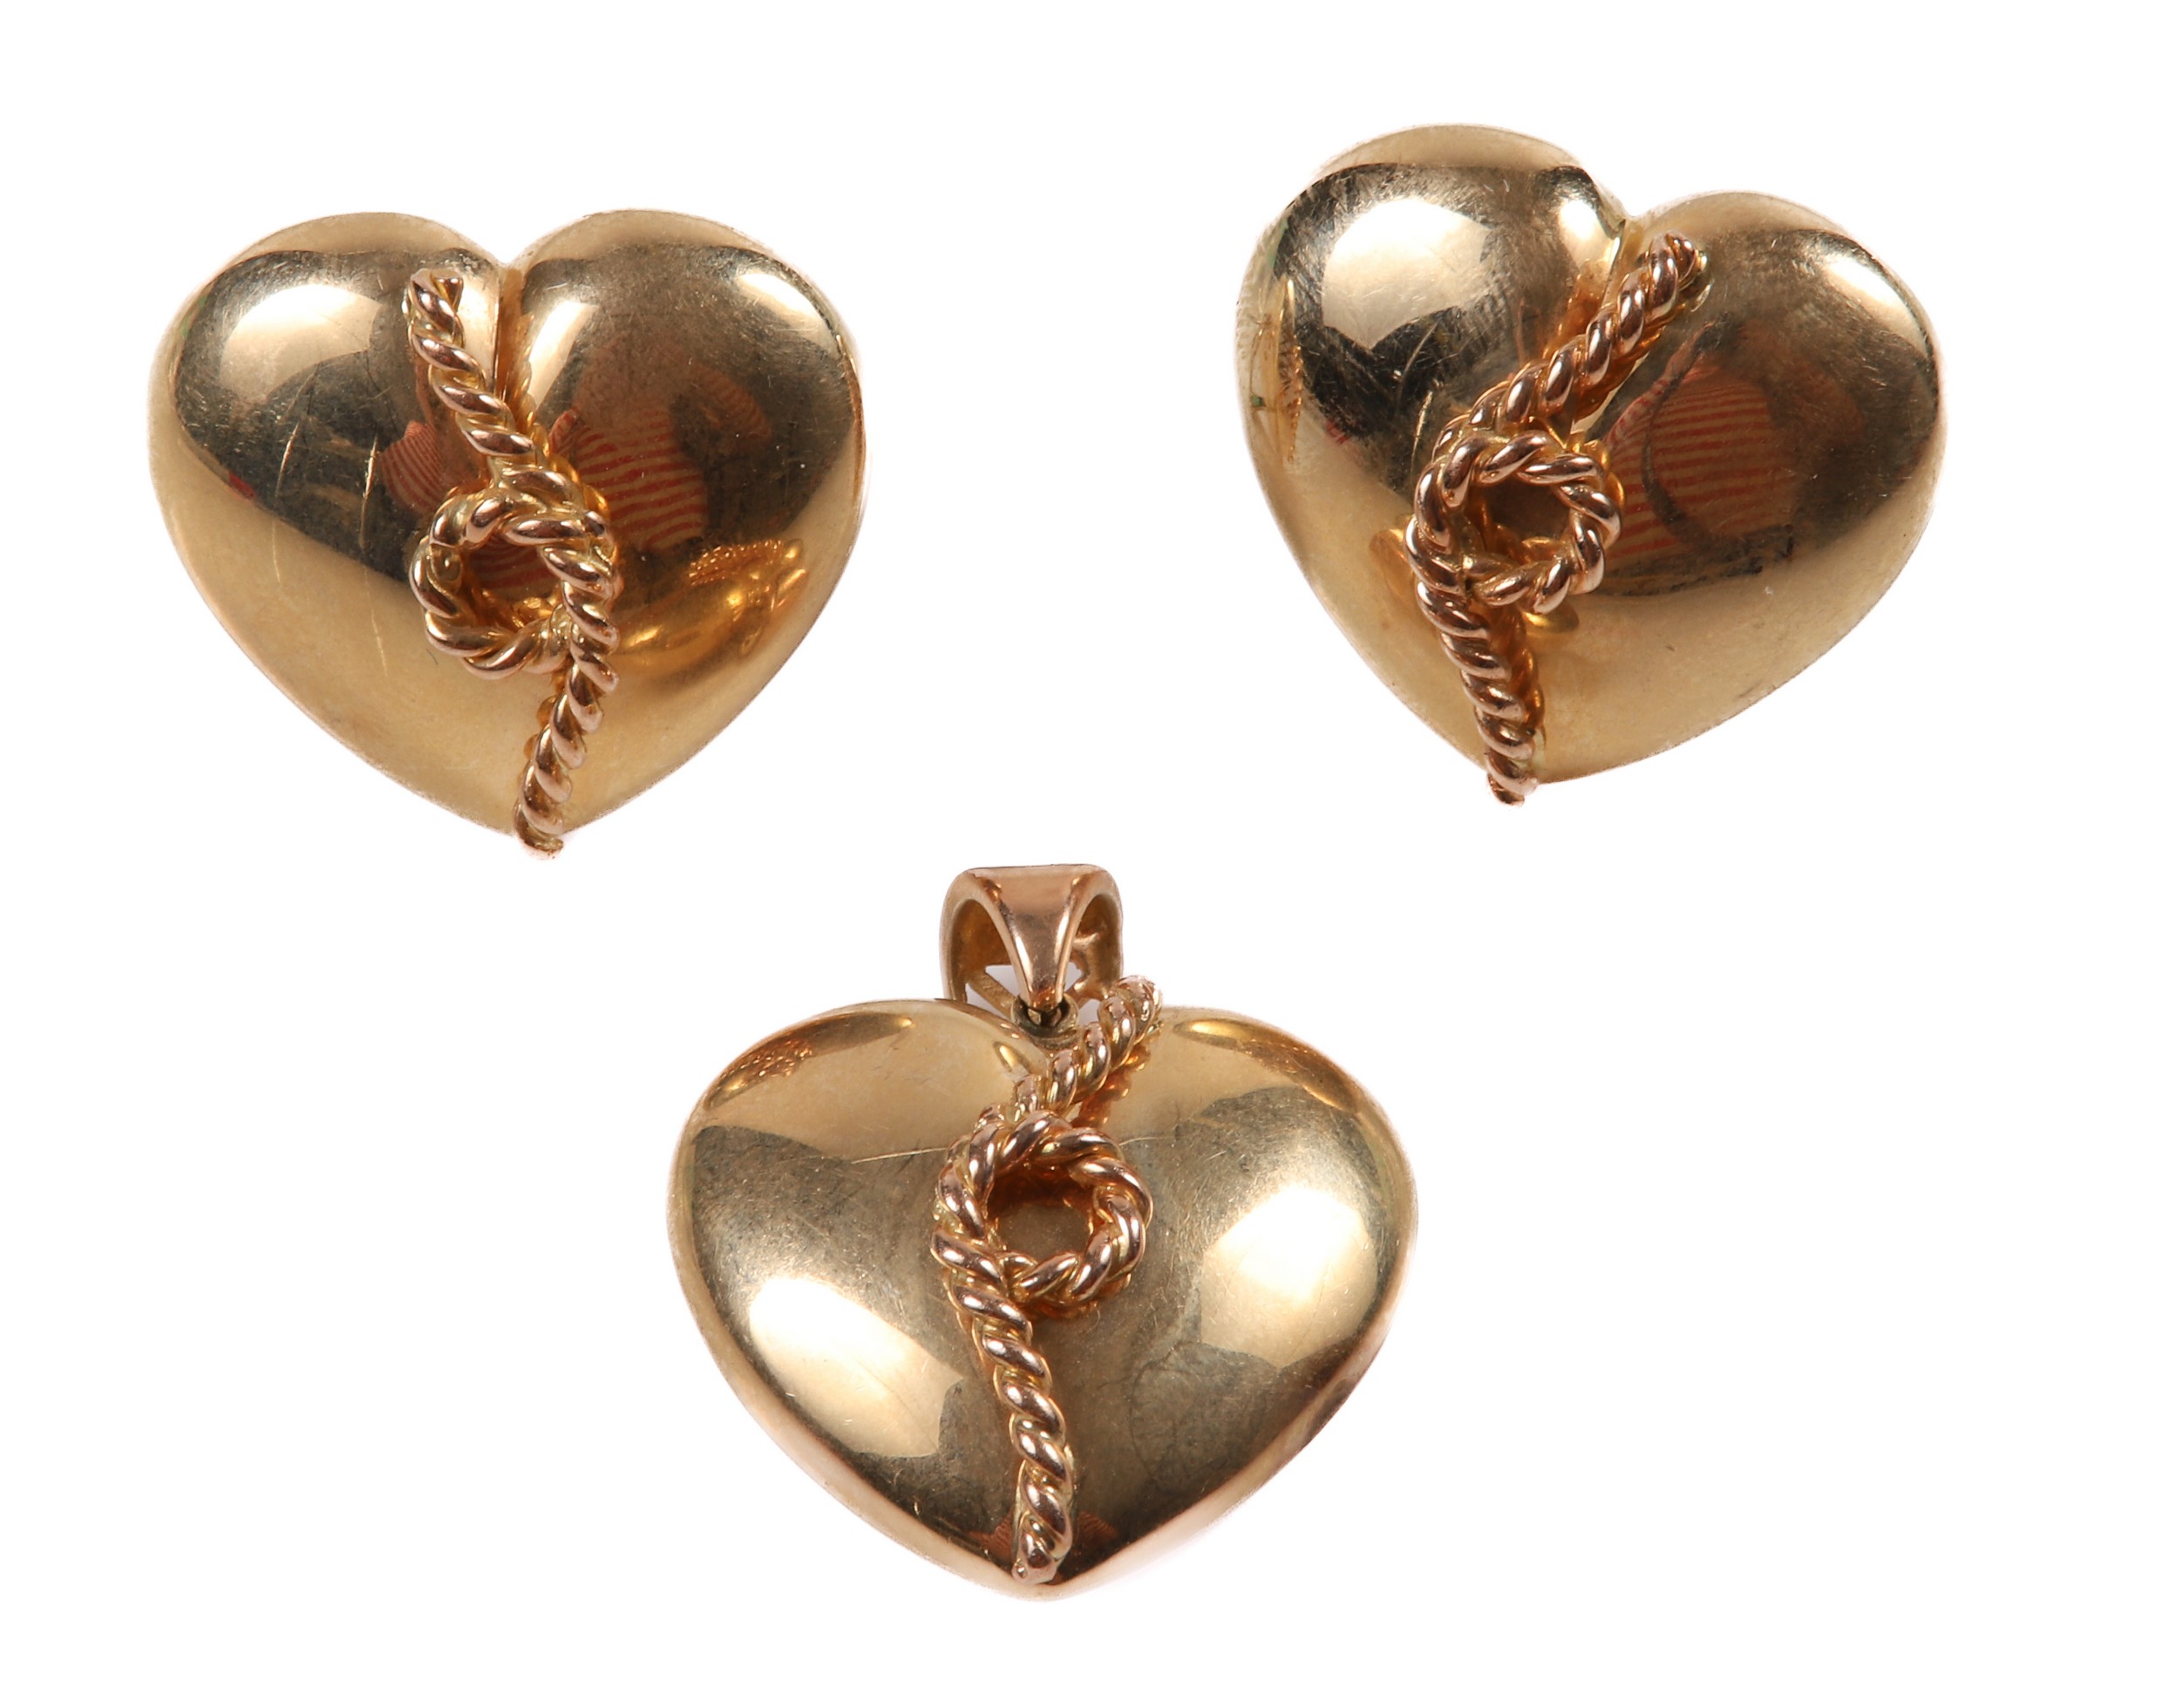 14K heart and knot earrings and